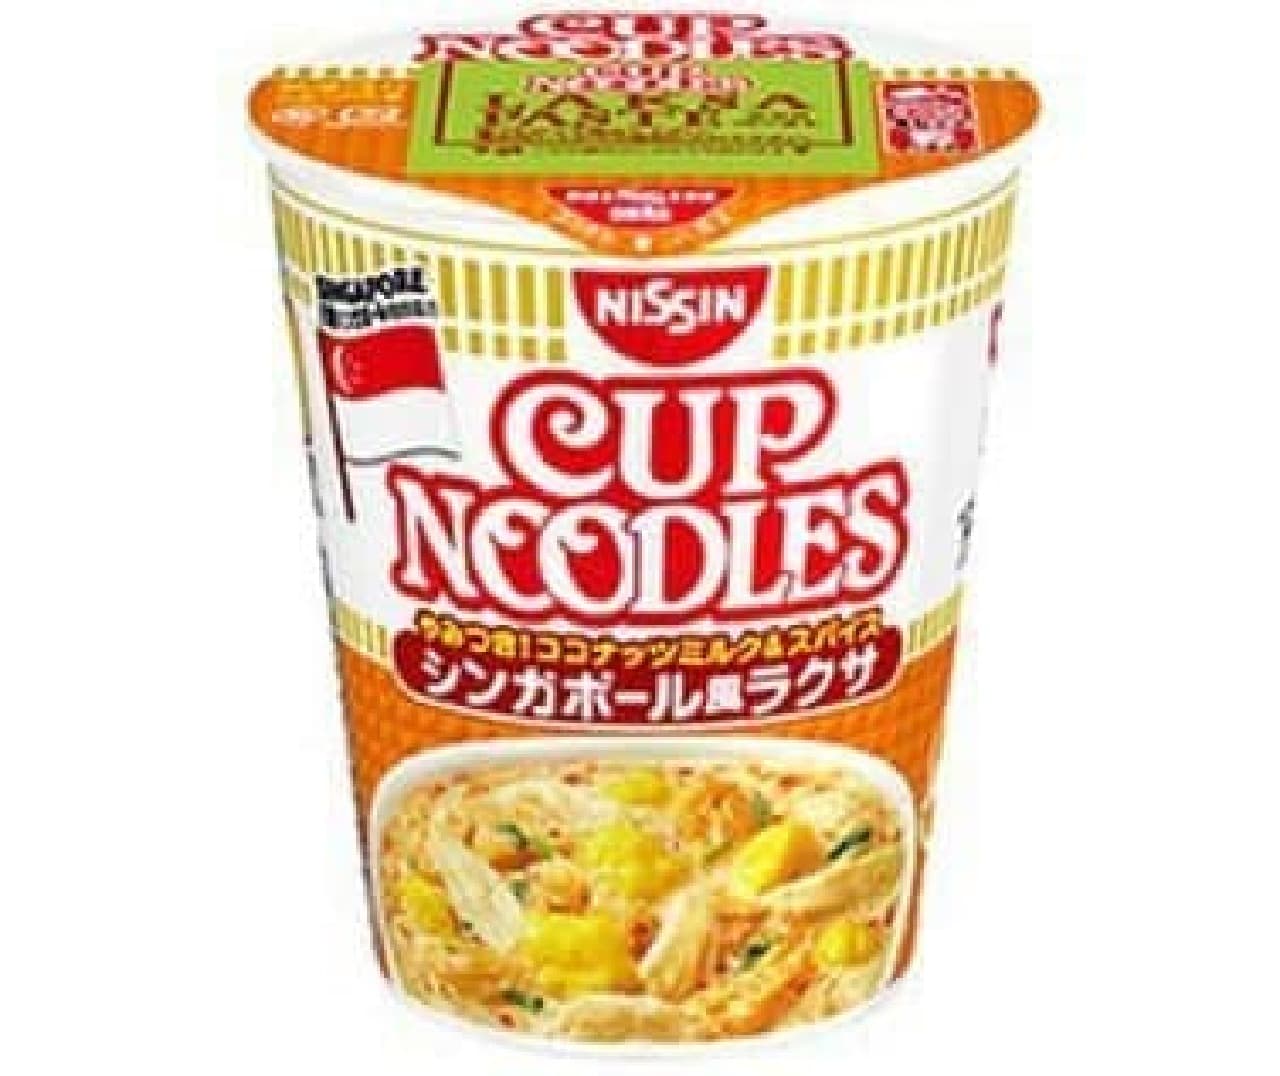 "Cup Noodle Singapore-style Laksa" is now available!